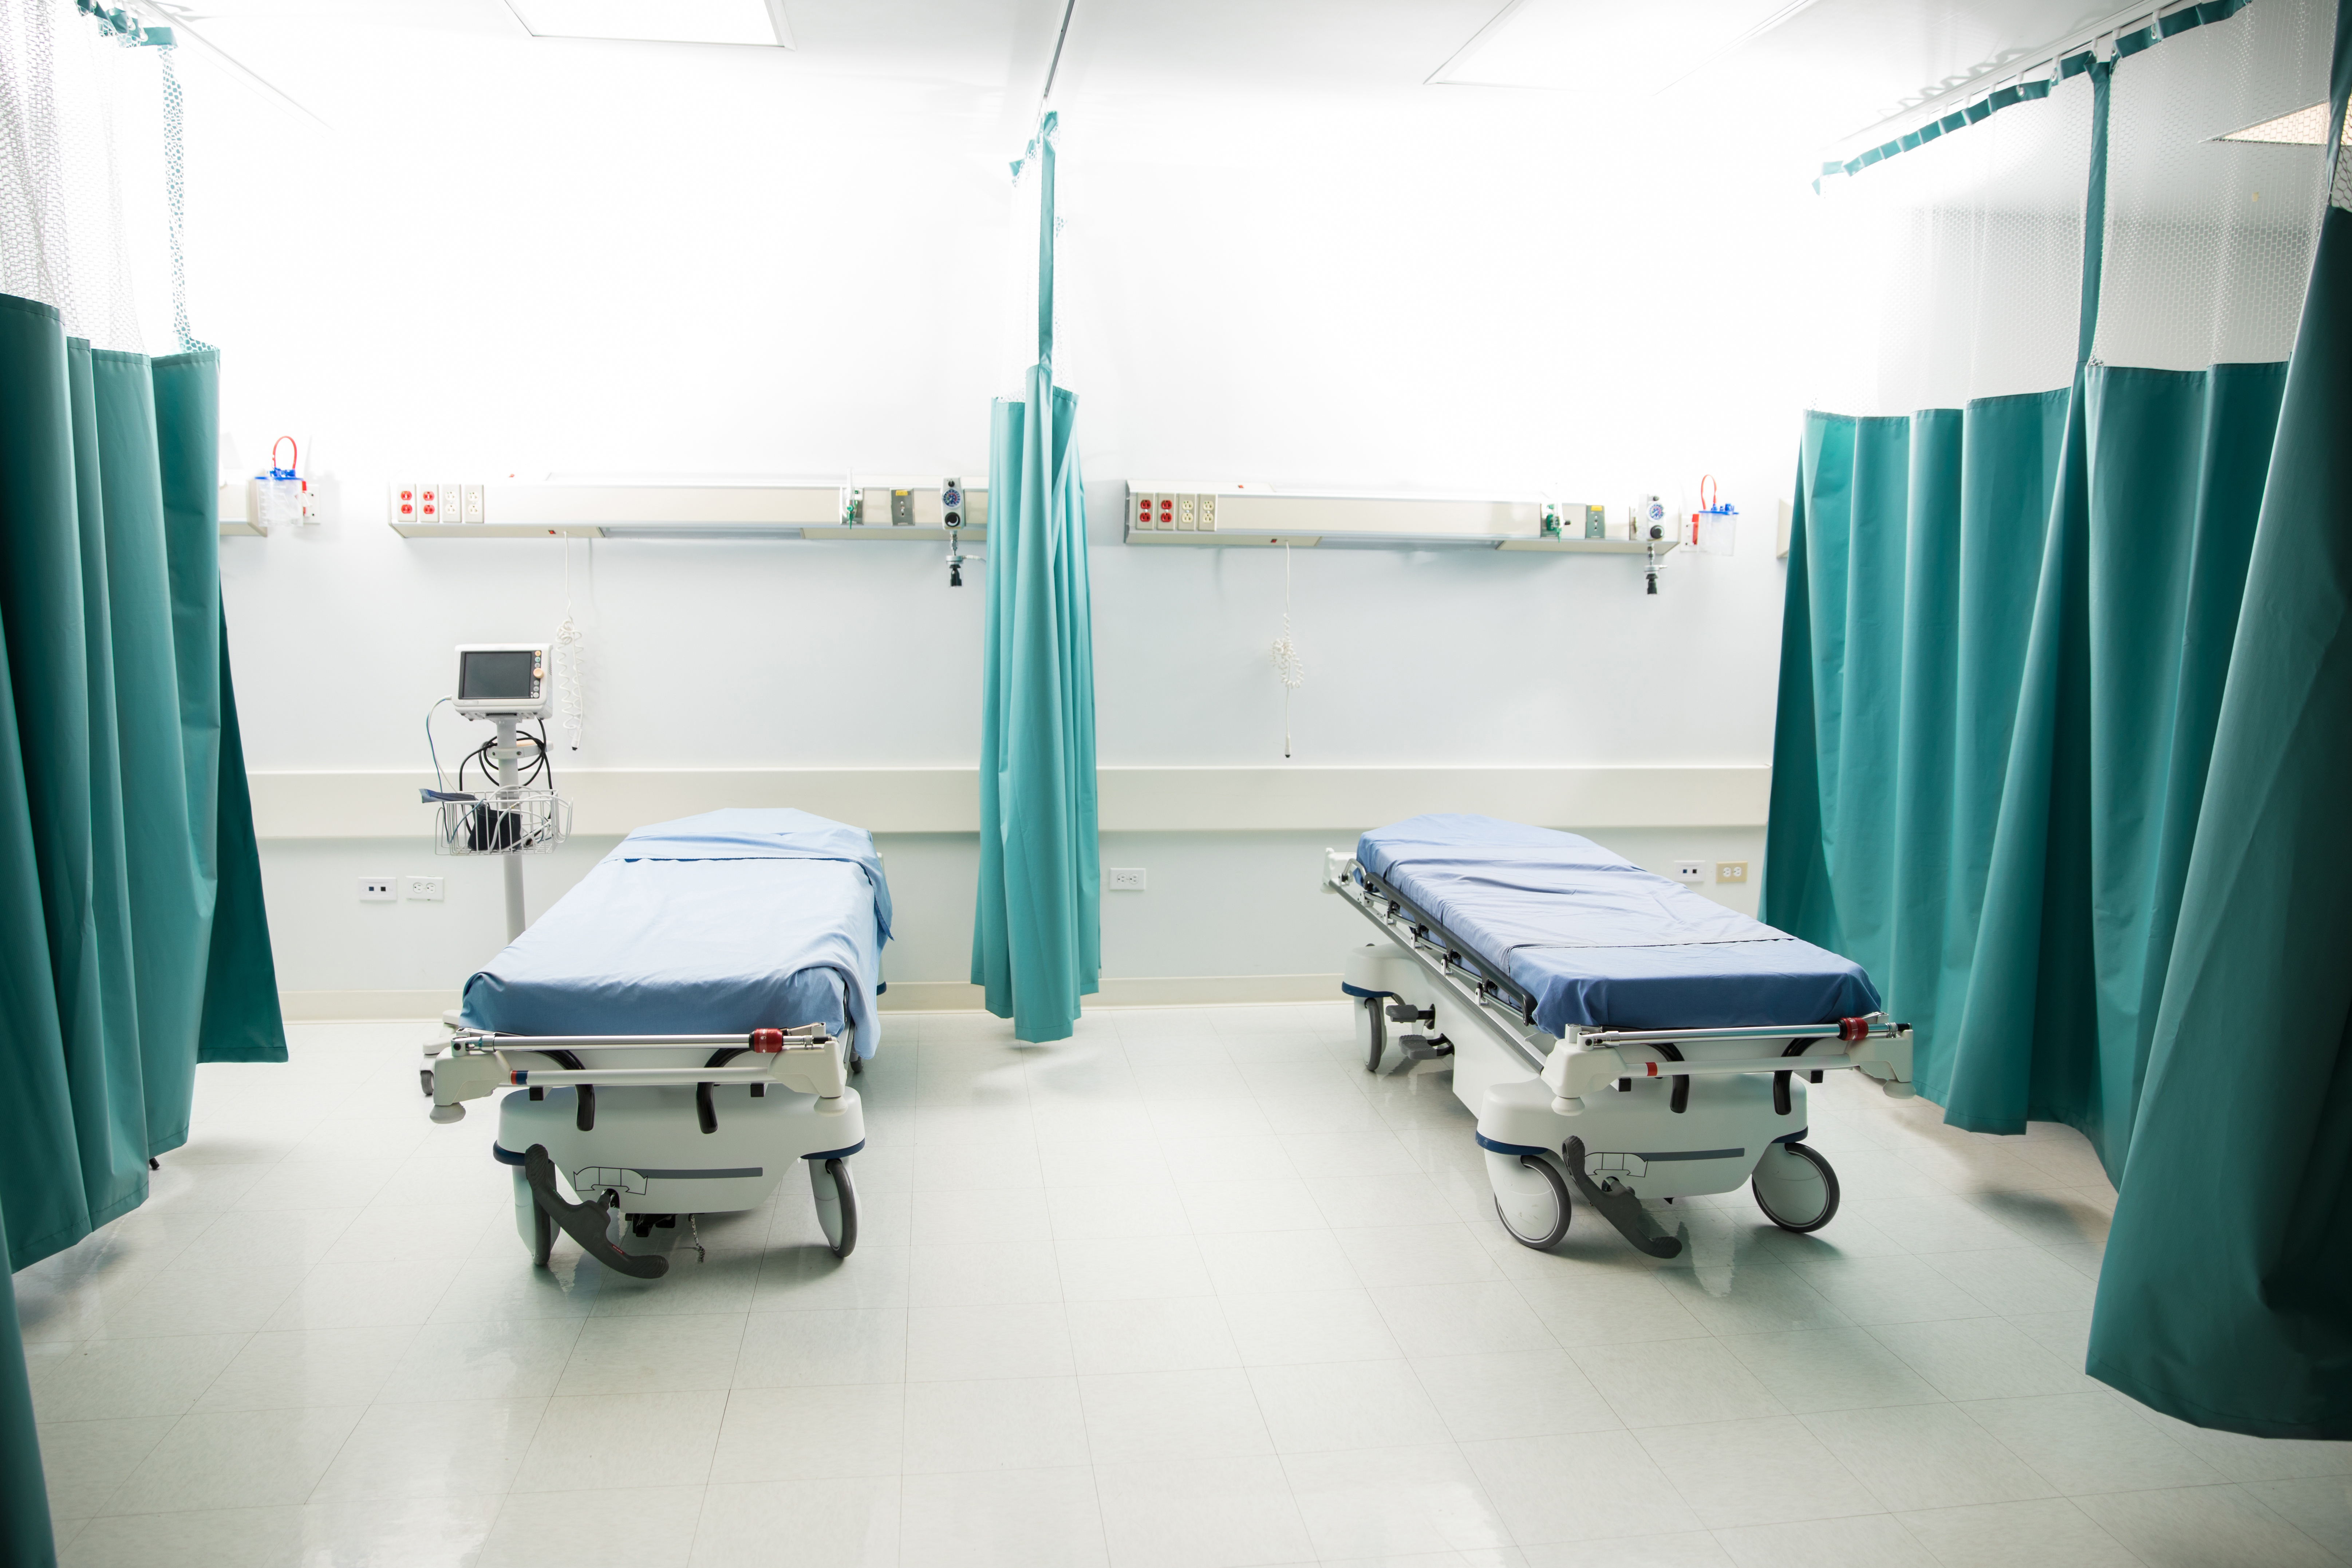 Empty hospital room with multiple beds